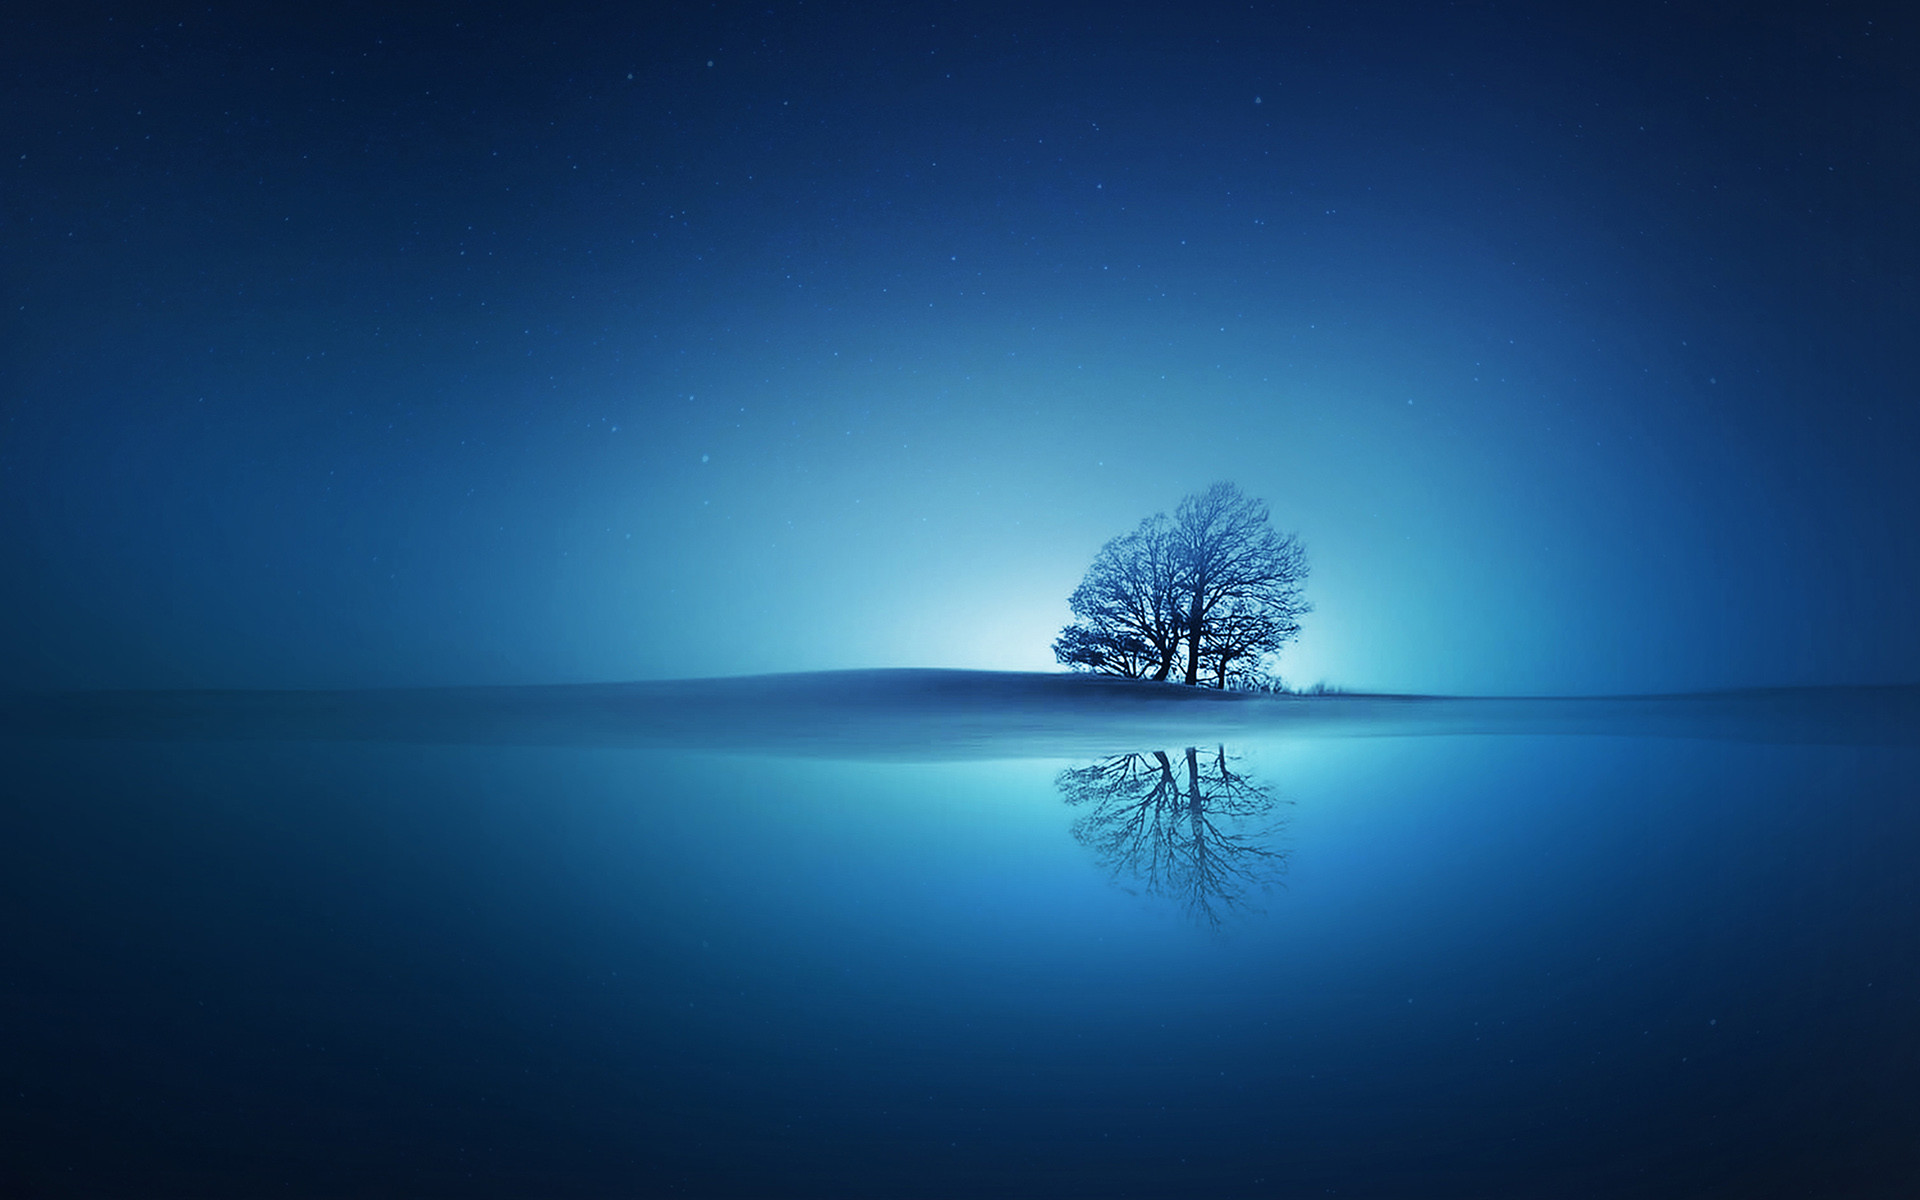 1920x1200 Blue Background Wallpaper Laptop | HD Wallpapers | Pinterest | Blue  backgrounds, Desktop backgrounds and Wallpaper